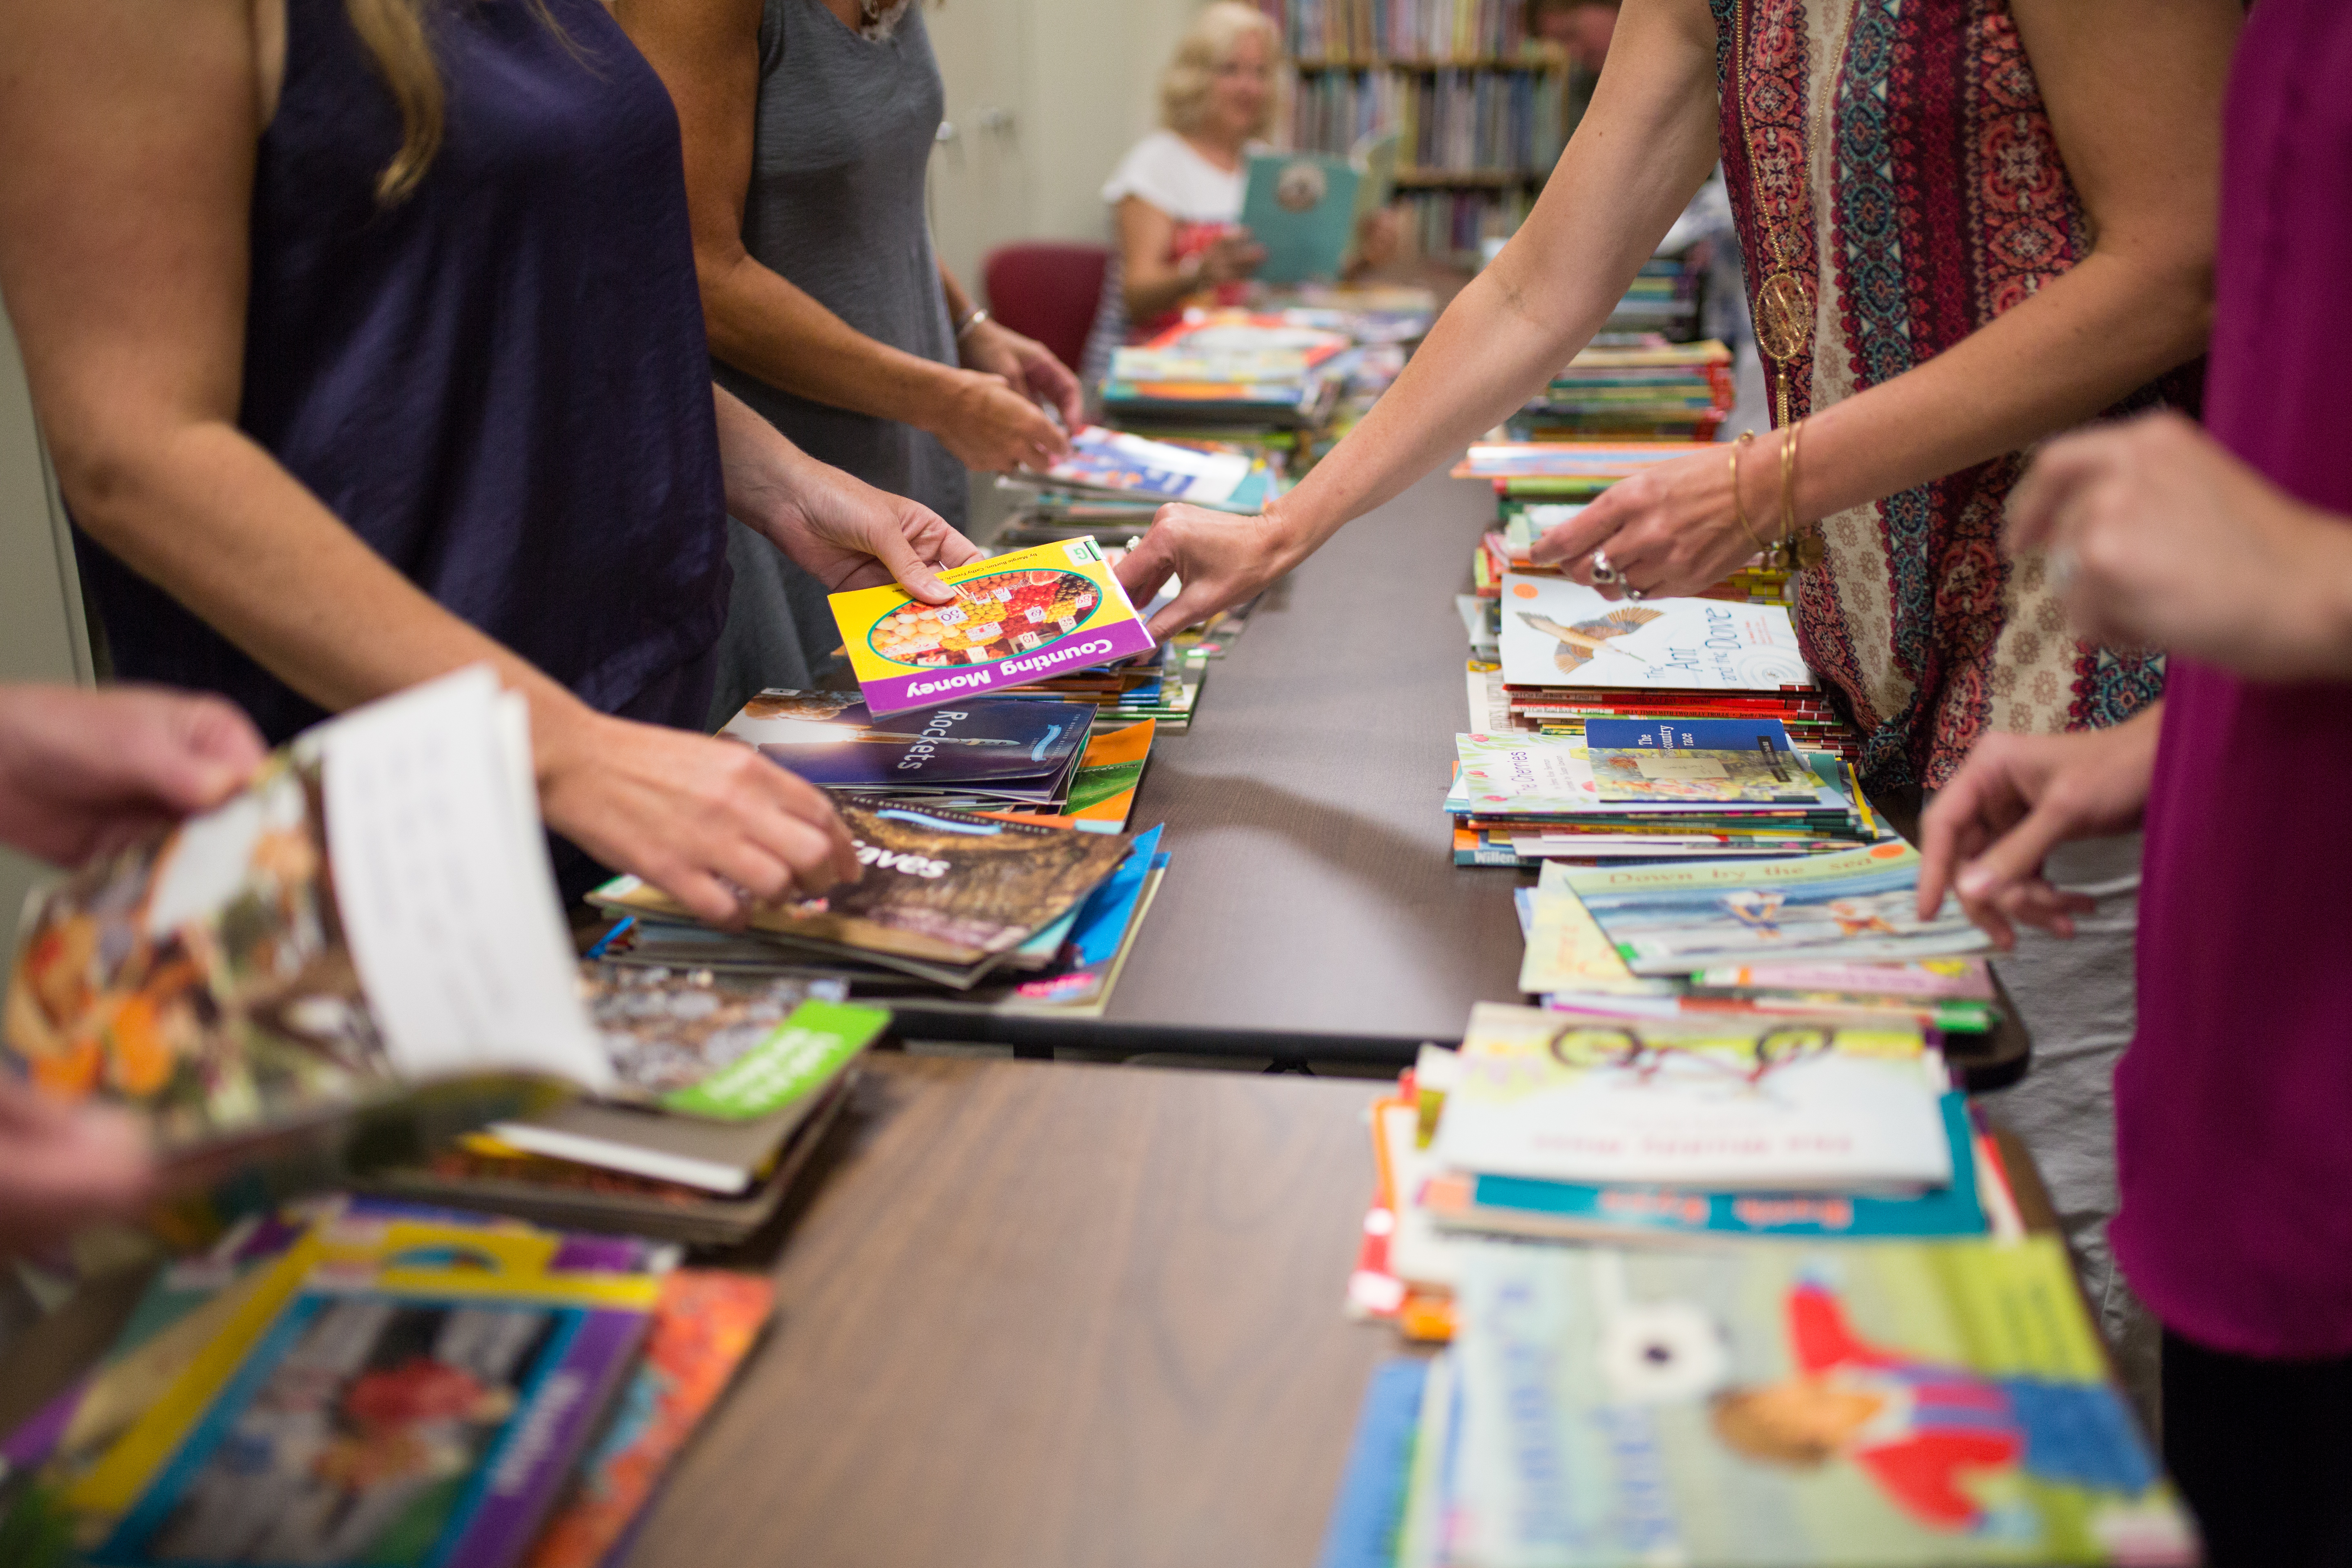 Children's books on a long table.